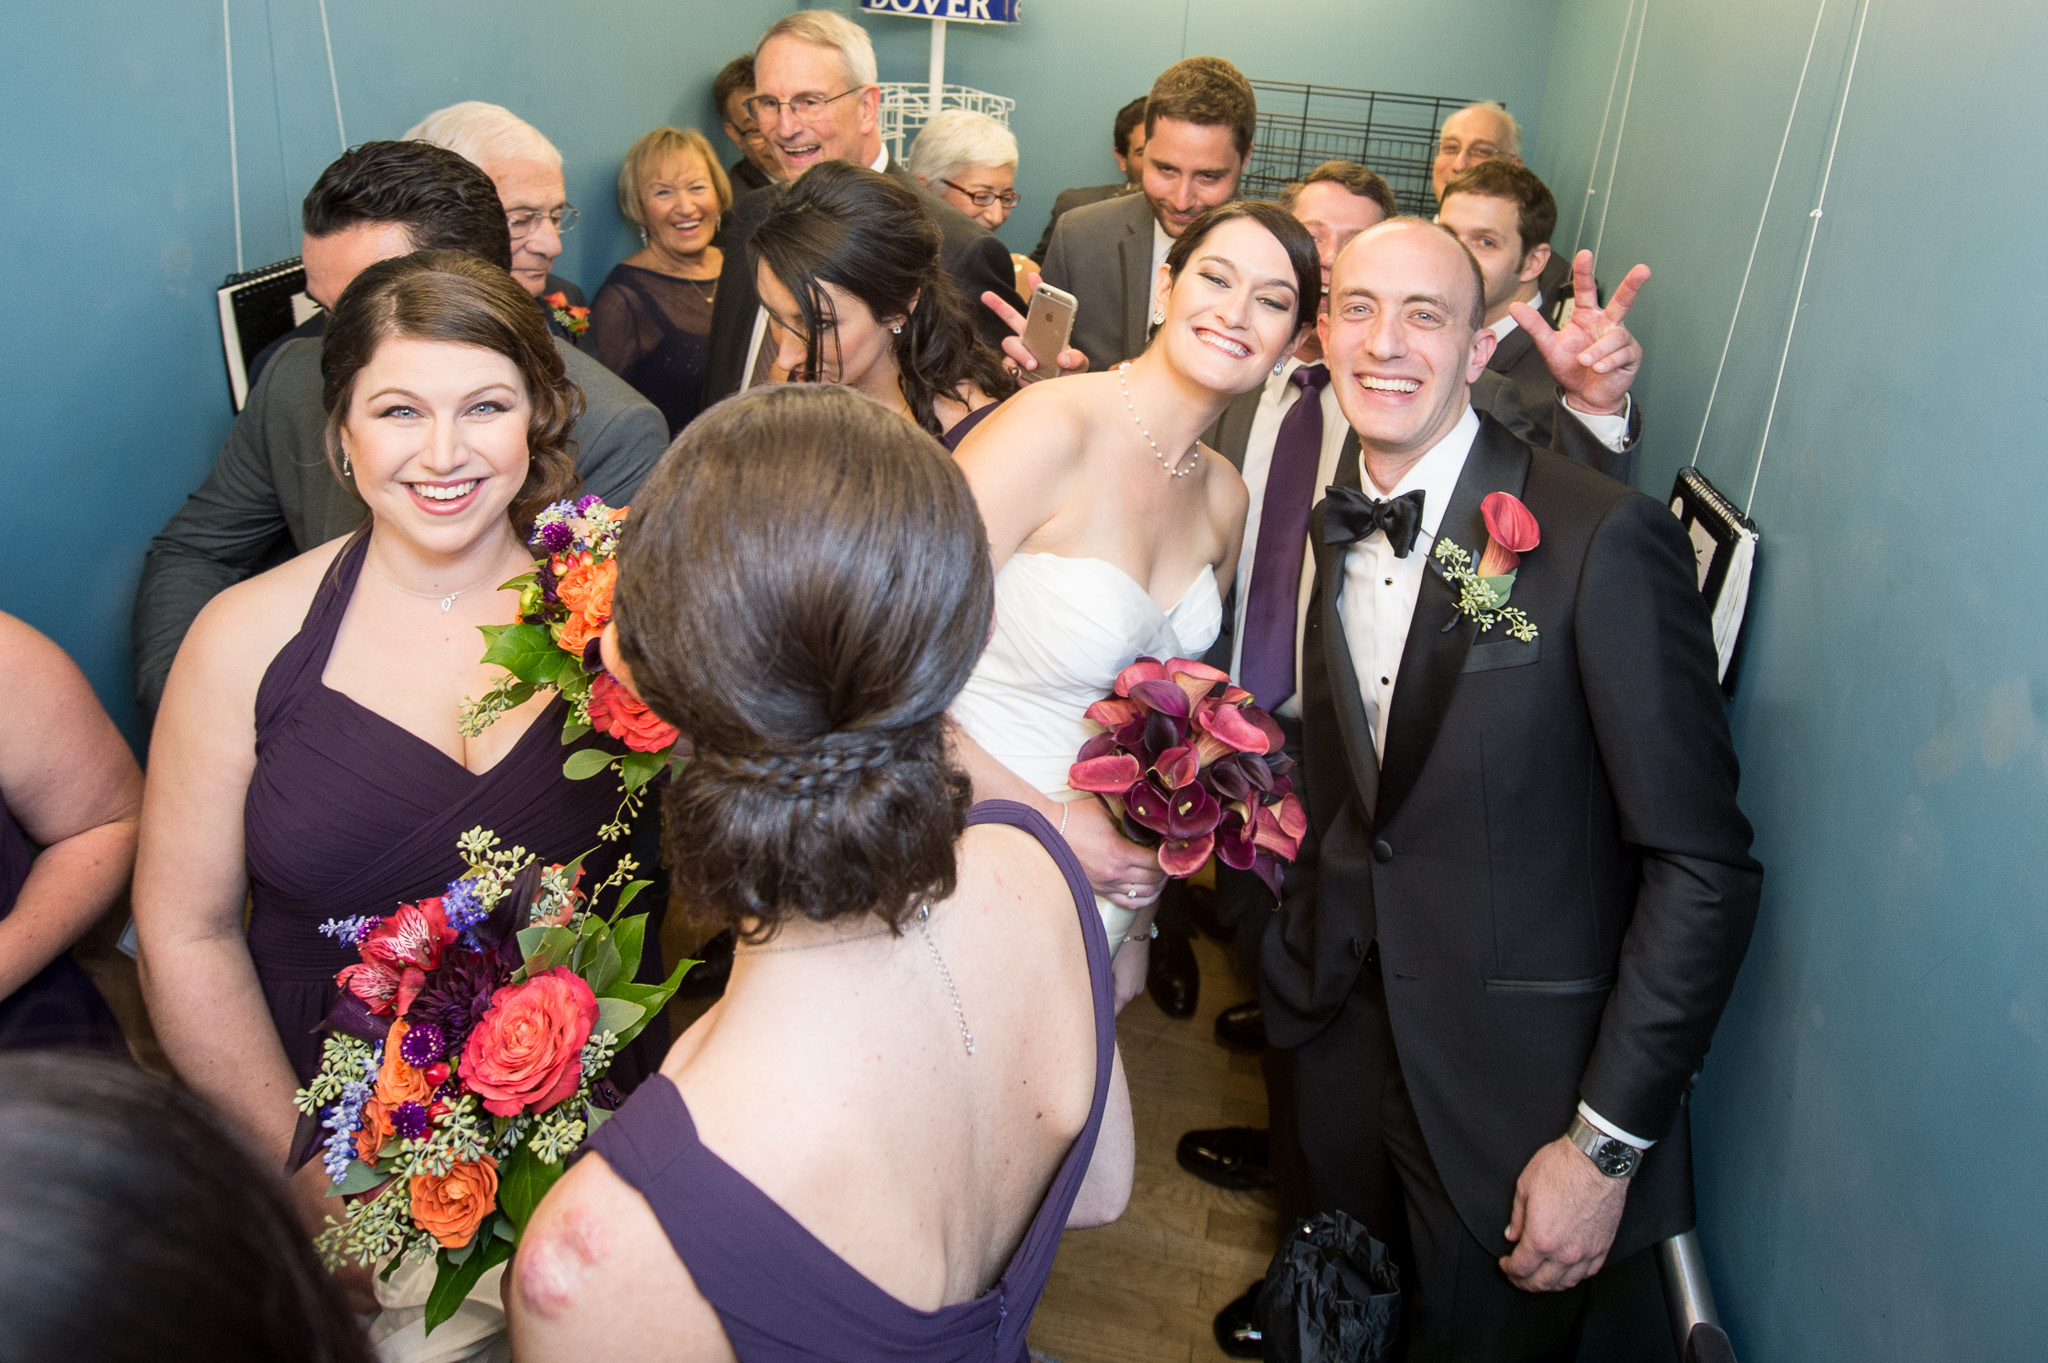 PHOTO: Liz Copeland and Harry Stein, along with their wedding party, were trapped in an elevator before the ceremony this weekend in Alexandria, Va., on Oct. 10, 2015.